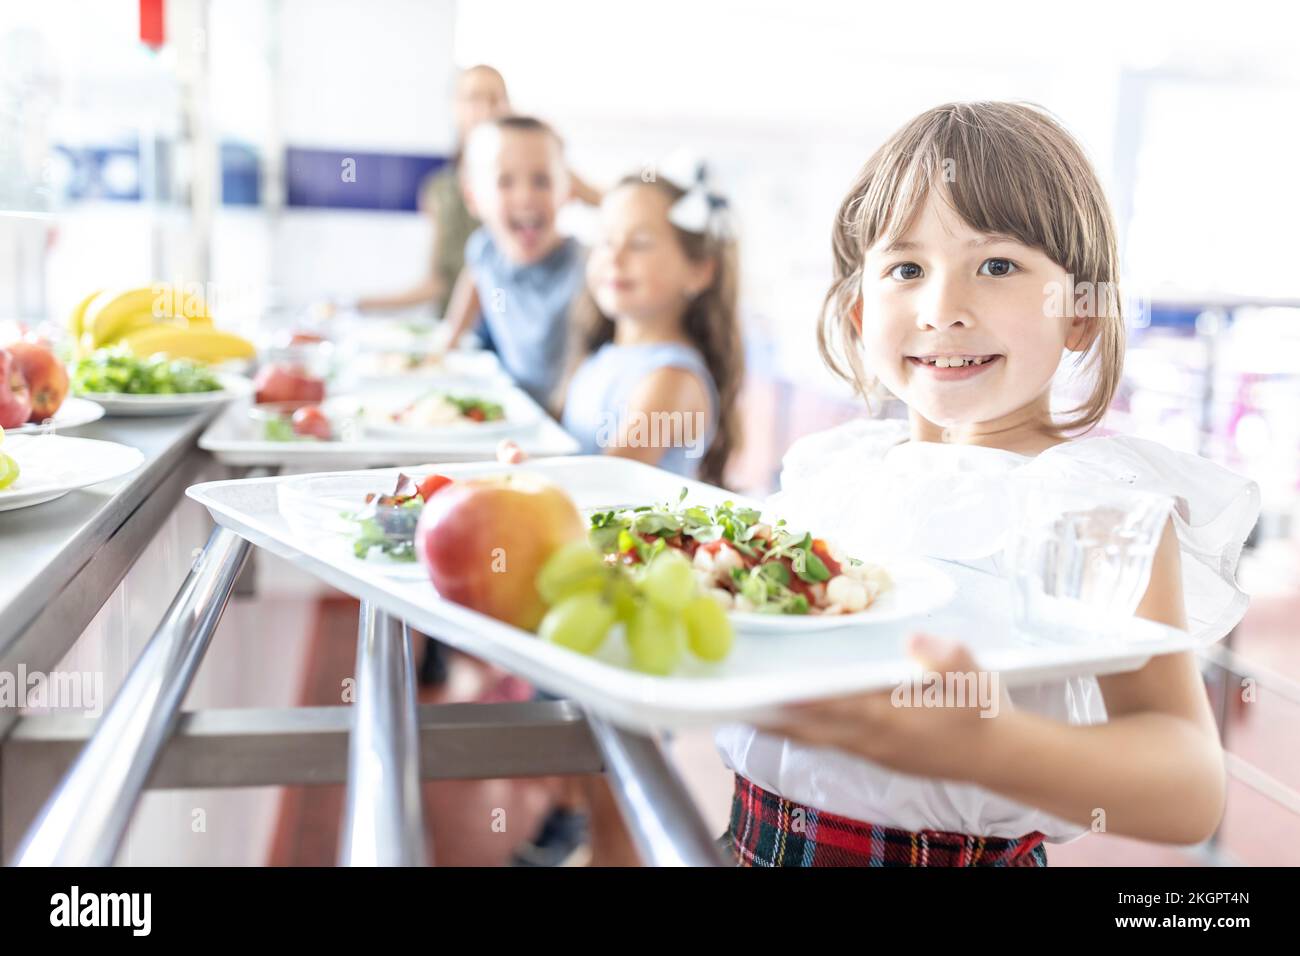 Happy School Children Holding Food Tray in Canteen Stock Photo - Image of  education, child: 142597954